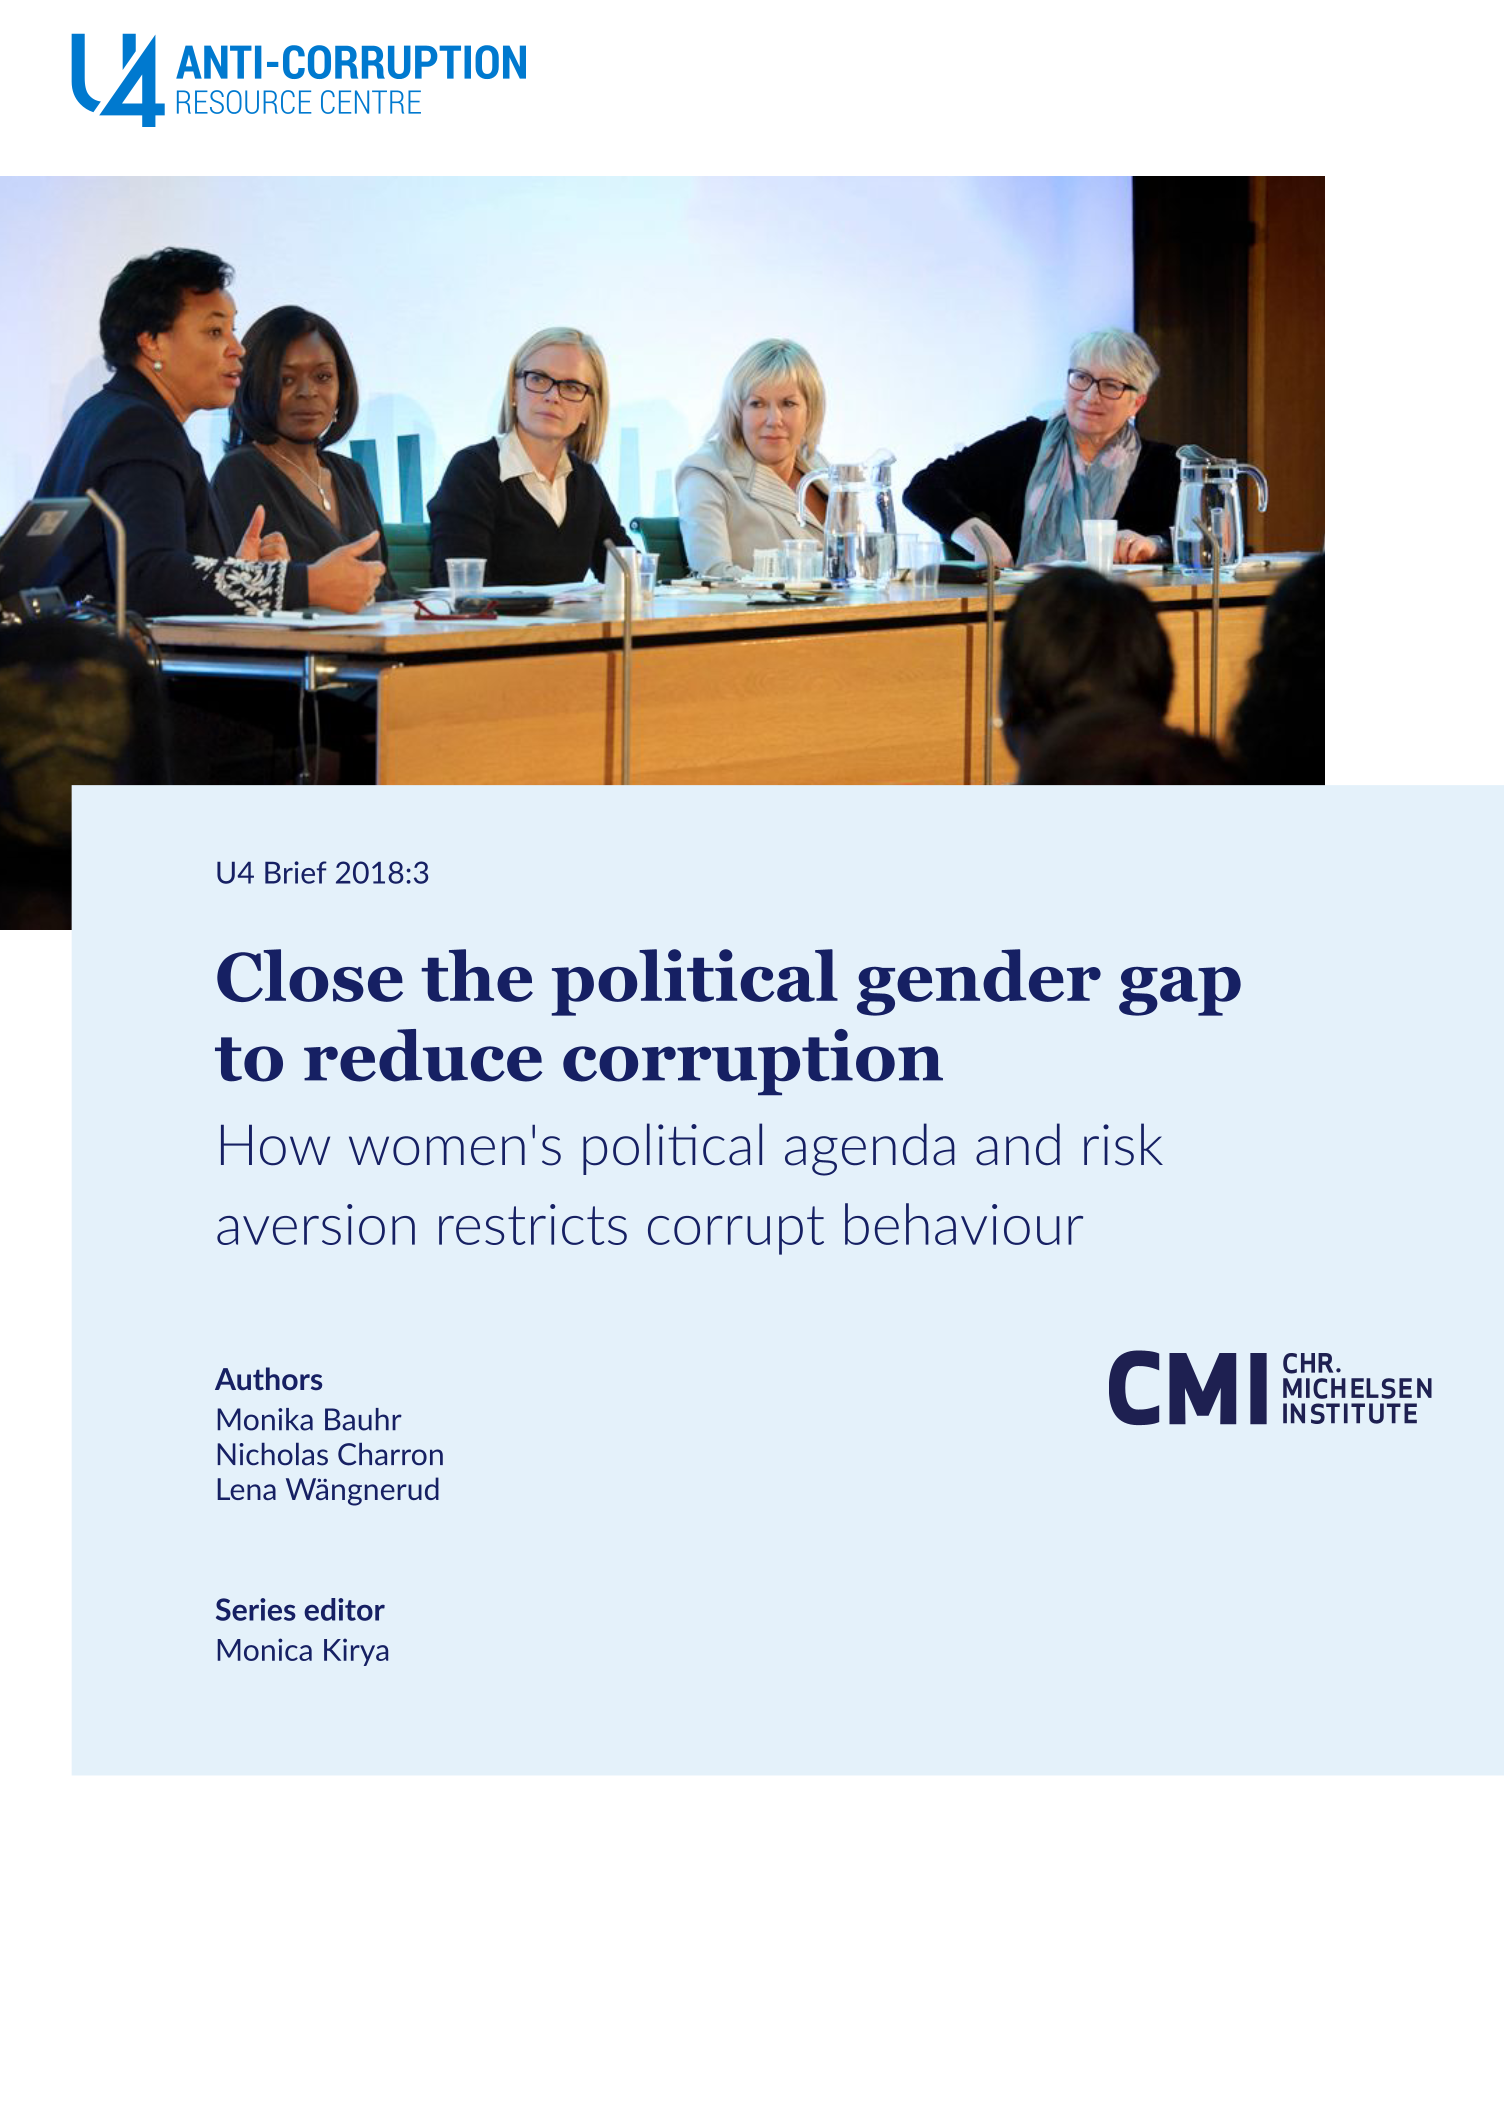 Close the political gender gap to reduce corruption